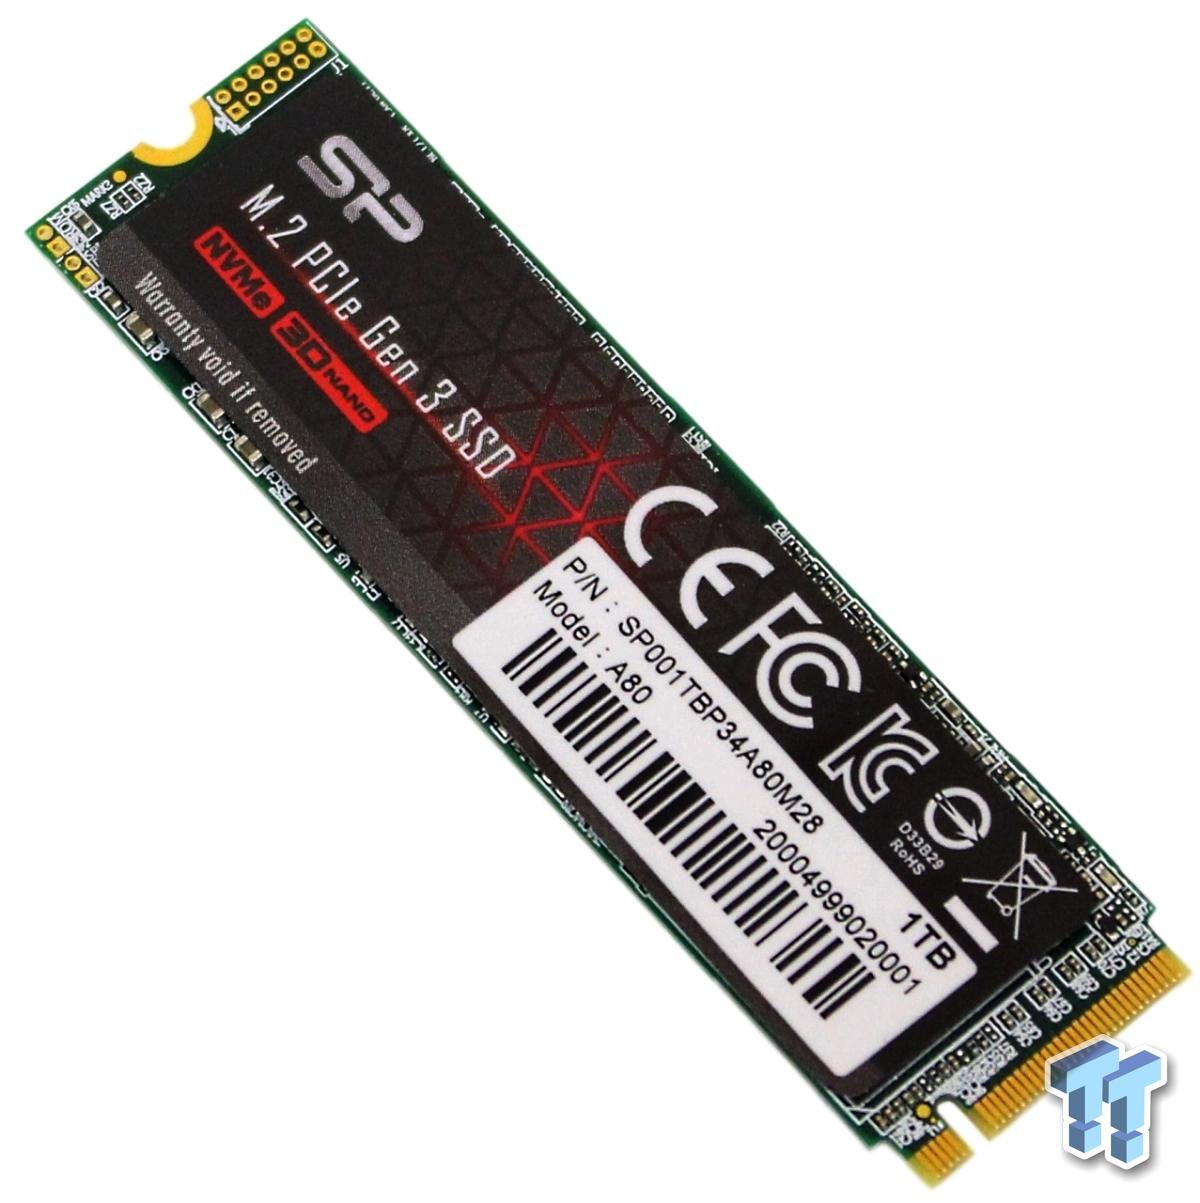 SiliconPower(シリコンパワー) SiliconPower M.2 2280 NVMe PCIe 3.0x4 SSD 1.0TB A60 SP001TBP34A60M28 返品種別B